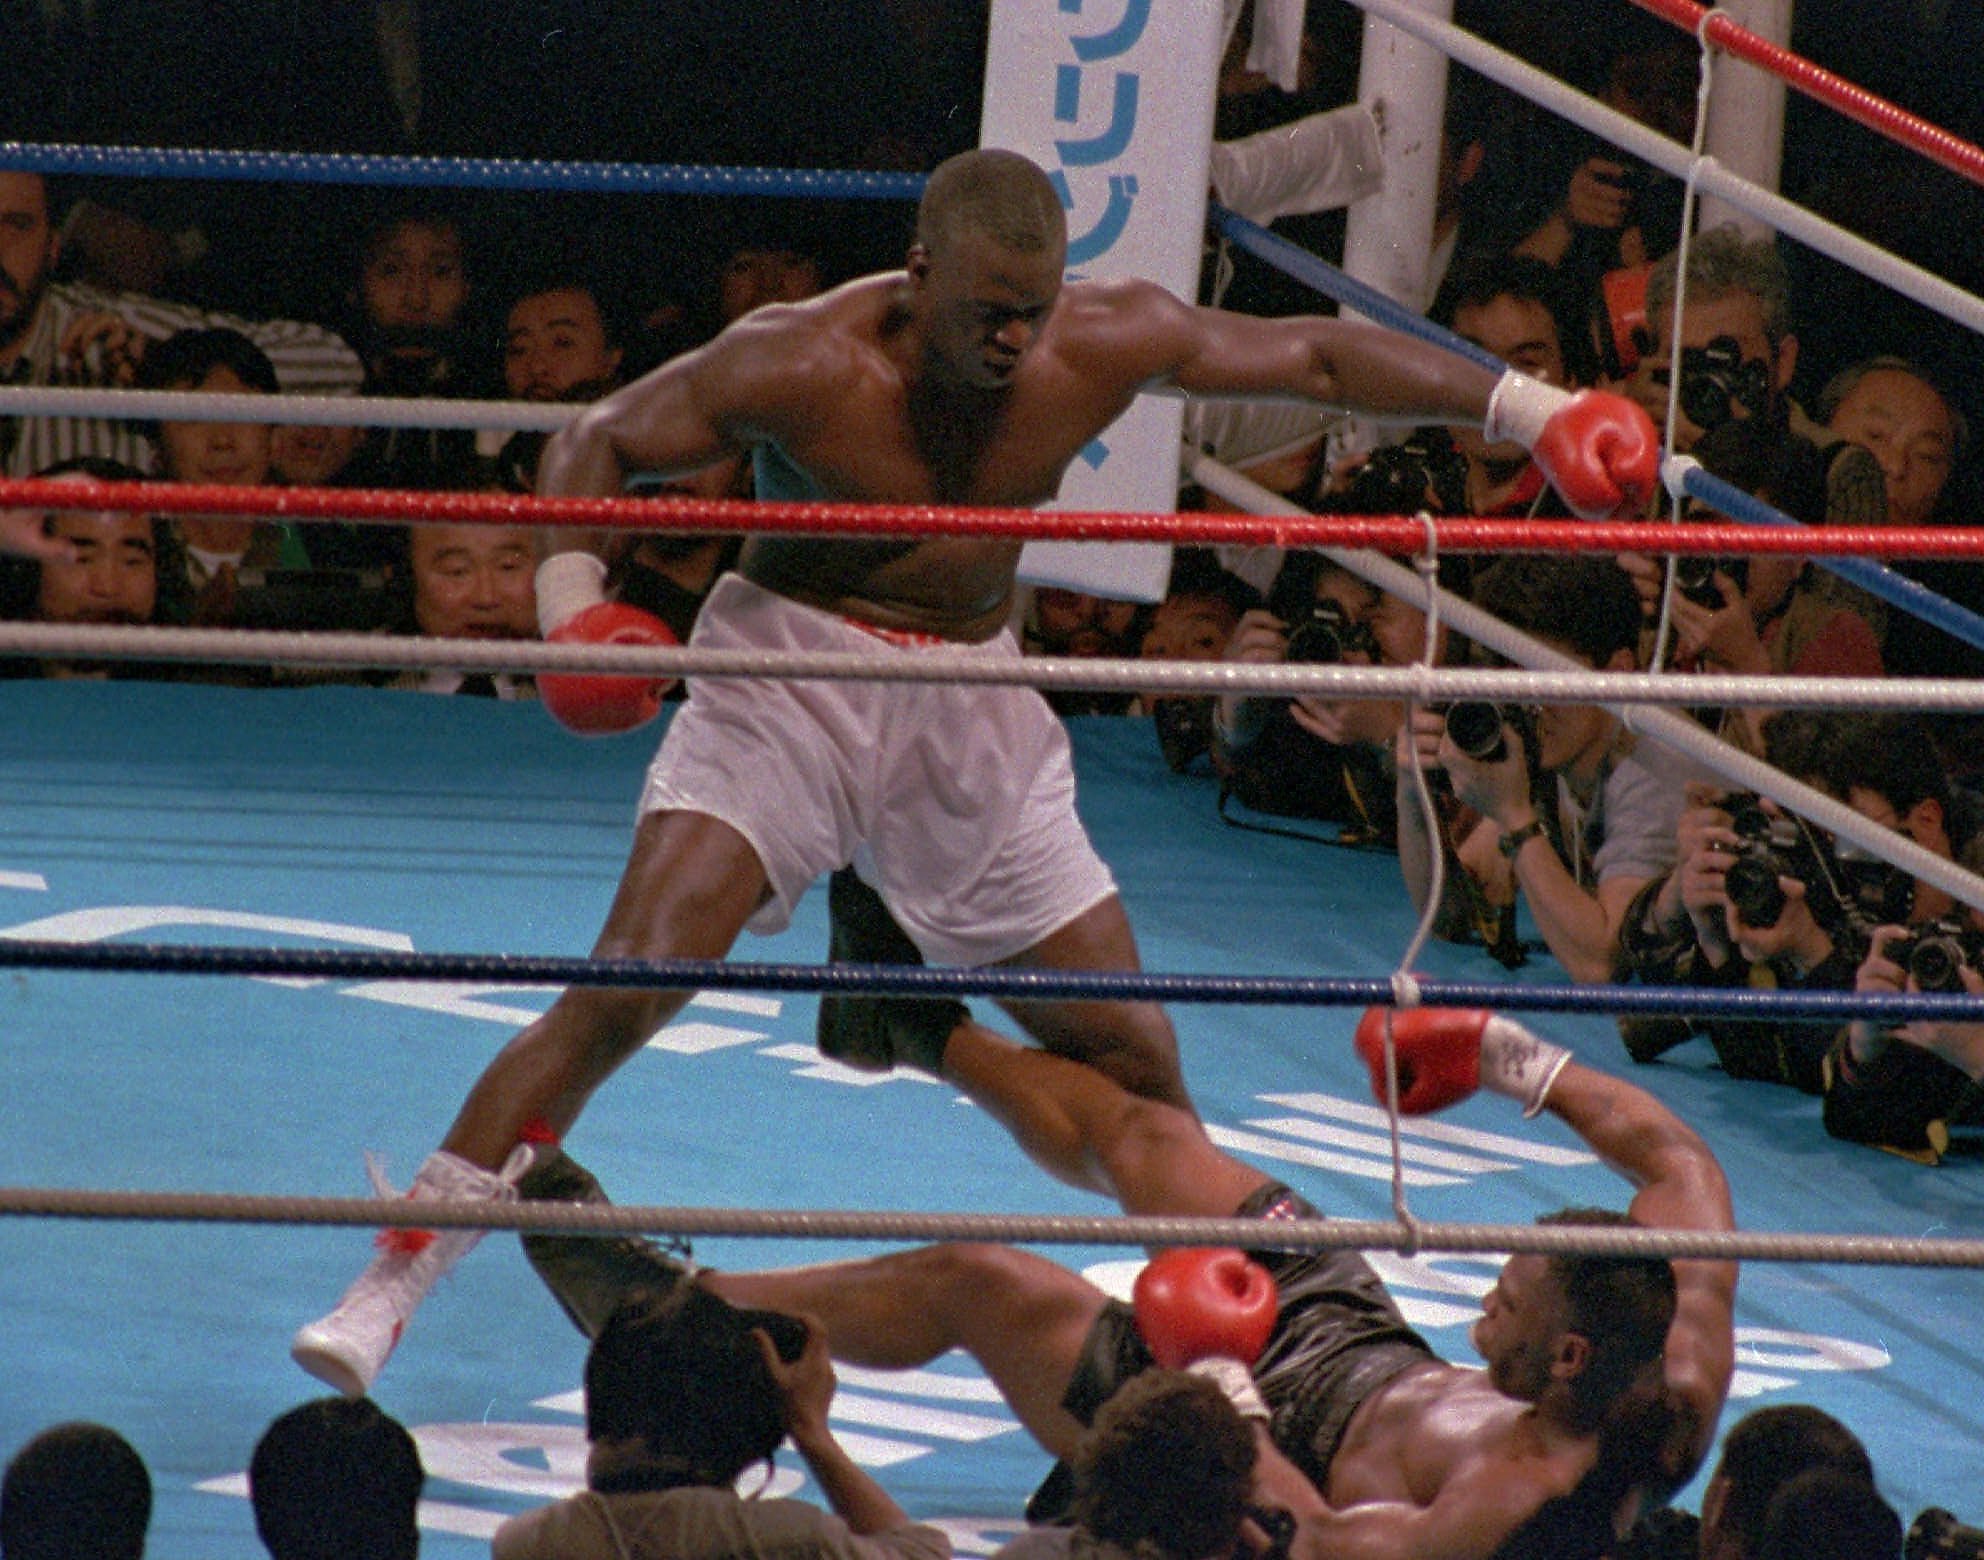 30 years after Mike Tyson fight, Buster Douglas is 'feeling good